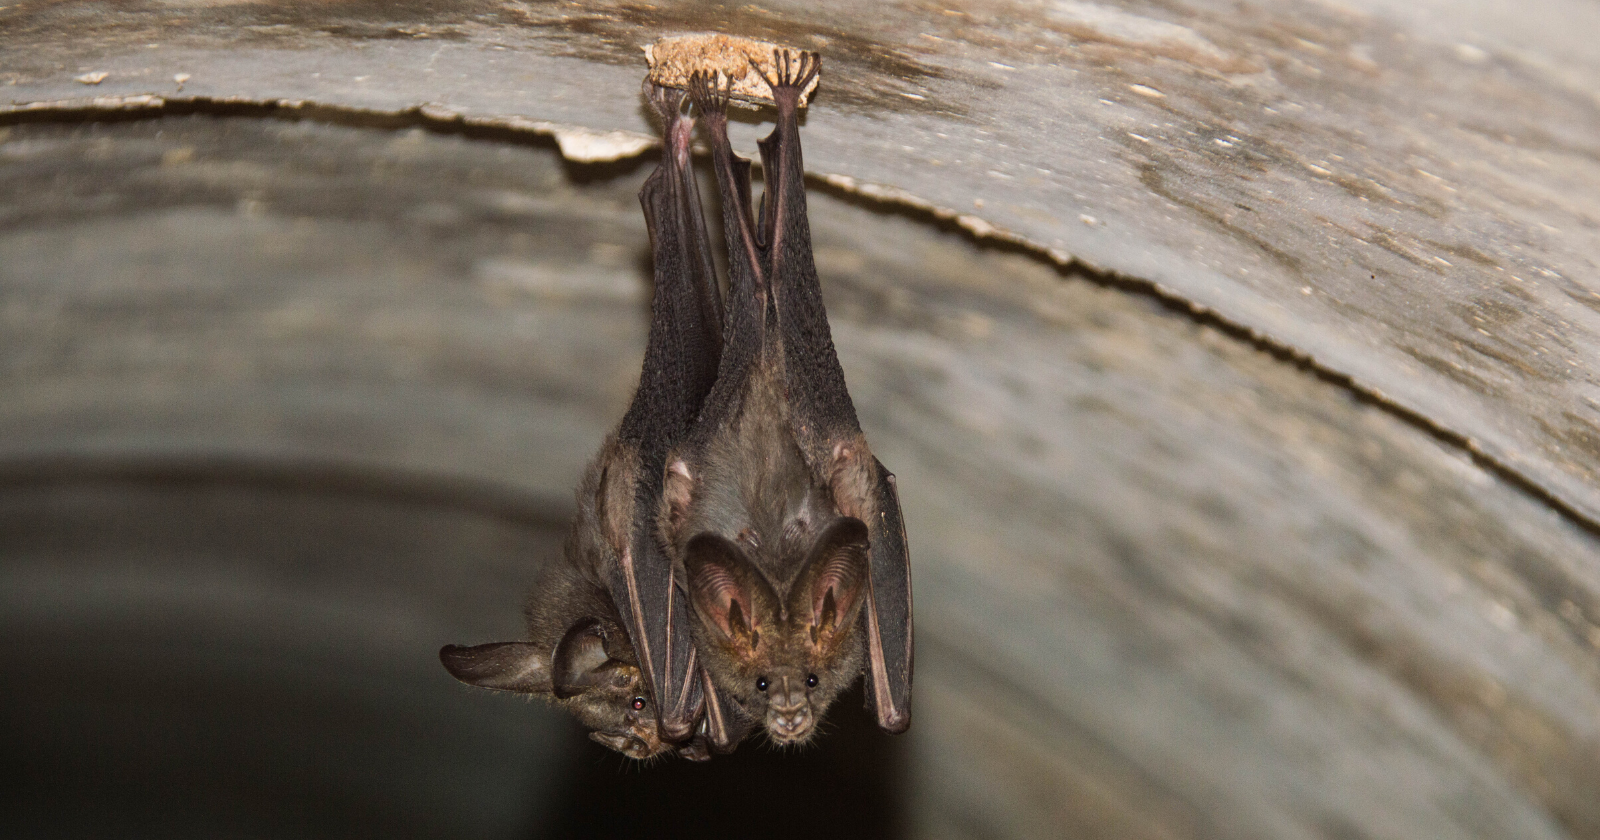 An endangered bat is believed to have been extinct in Rwanda for 40 years